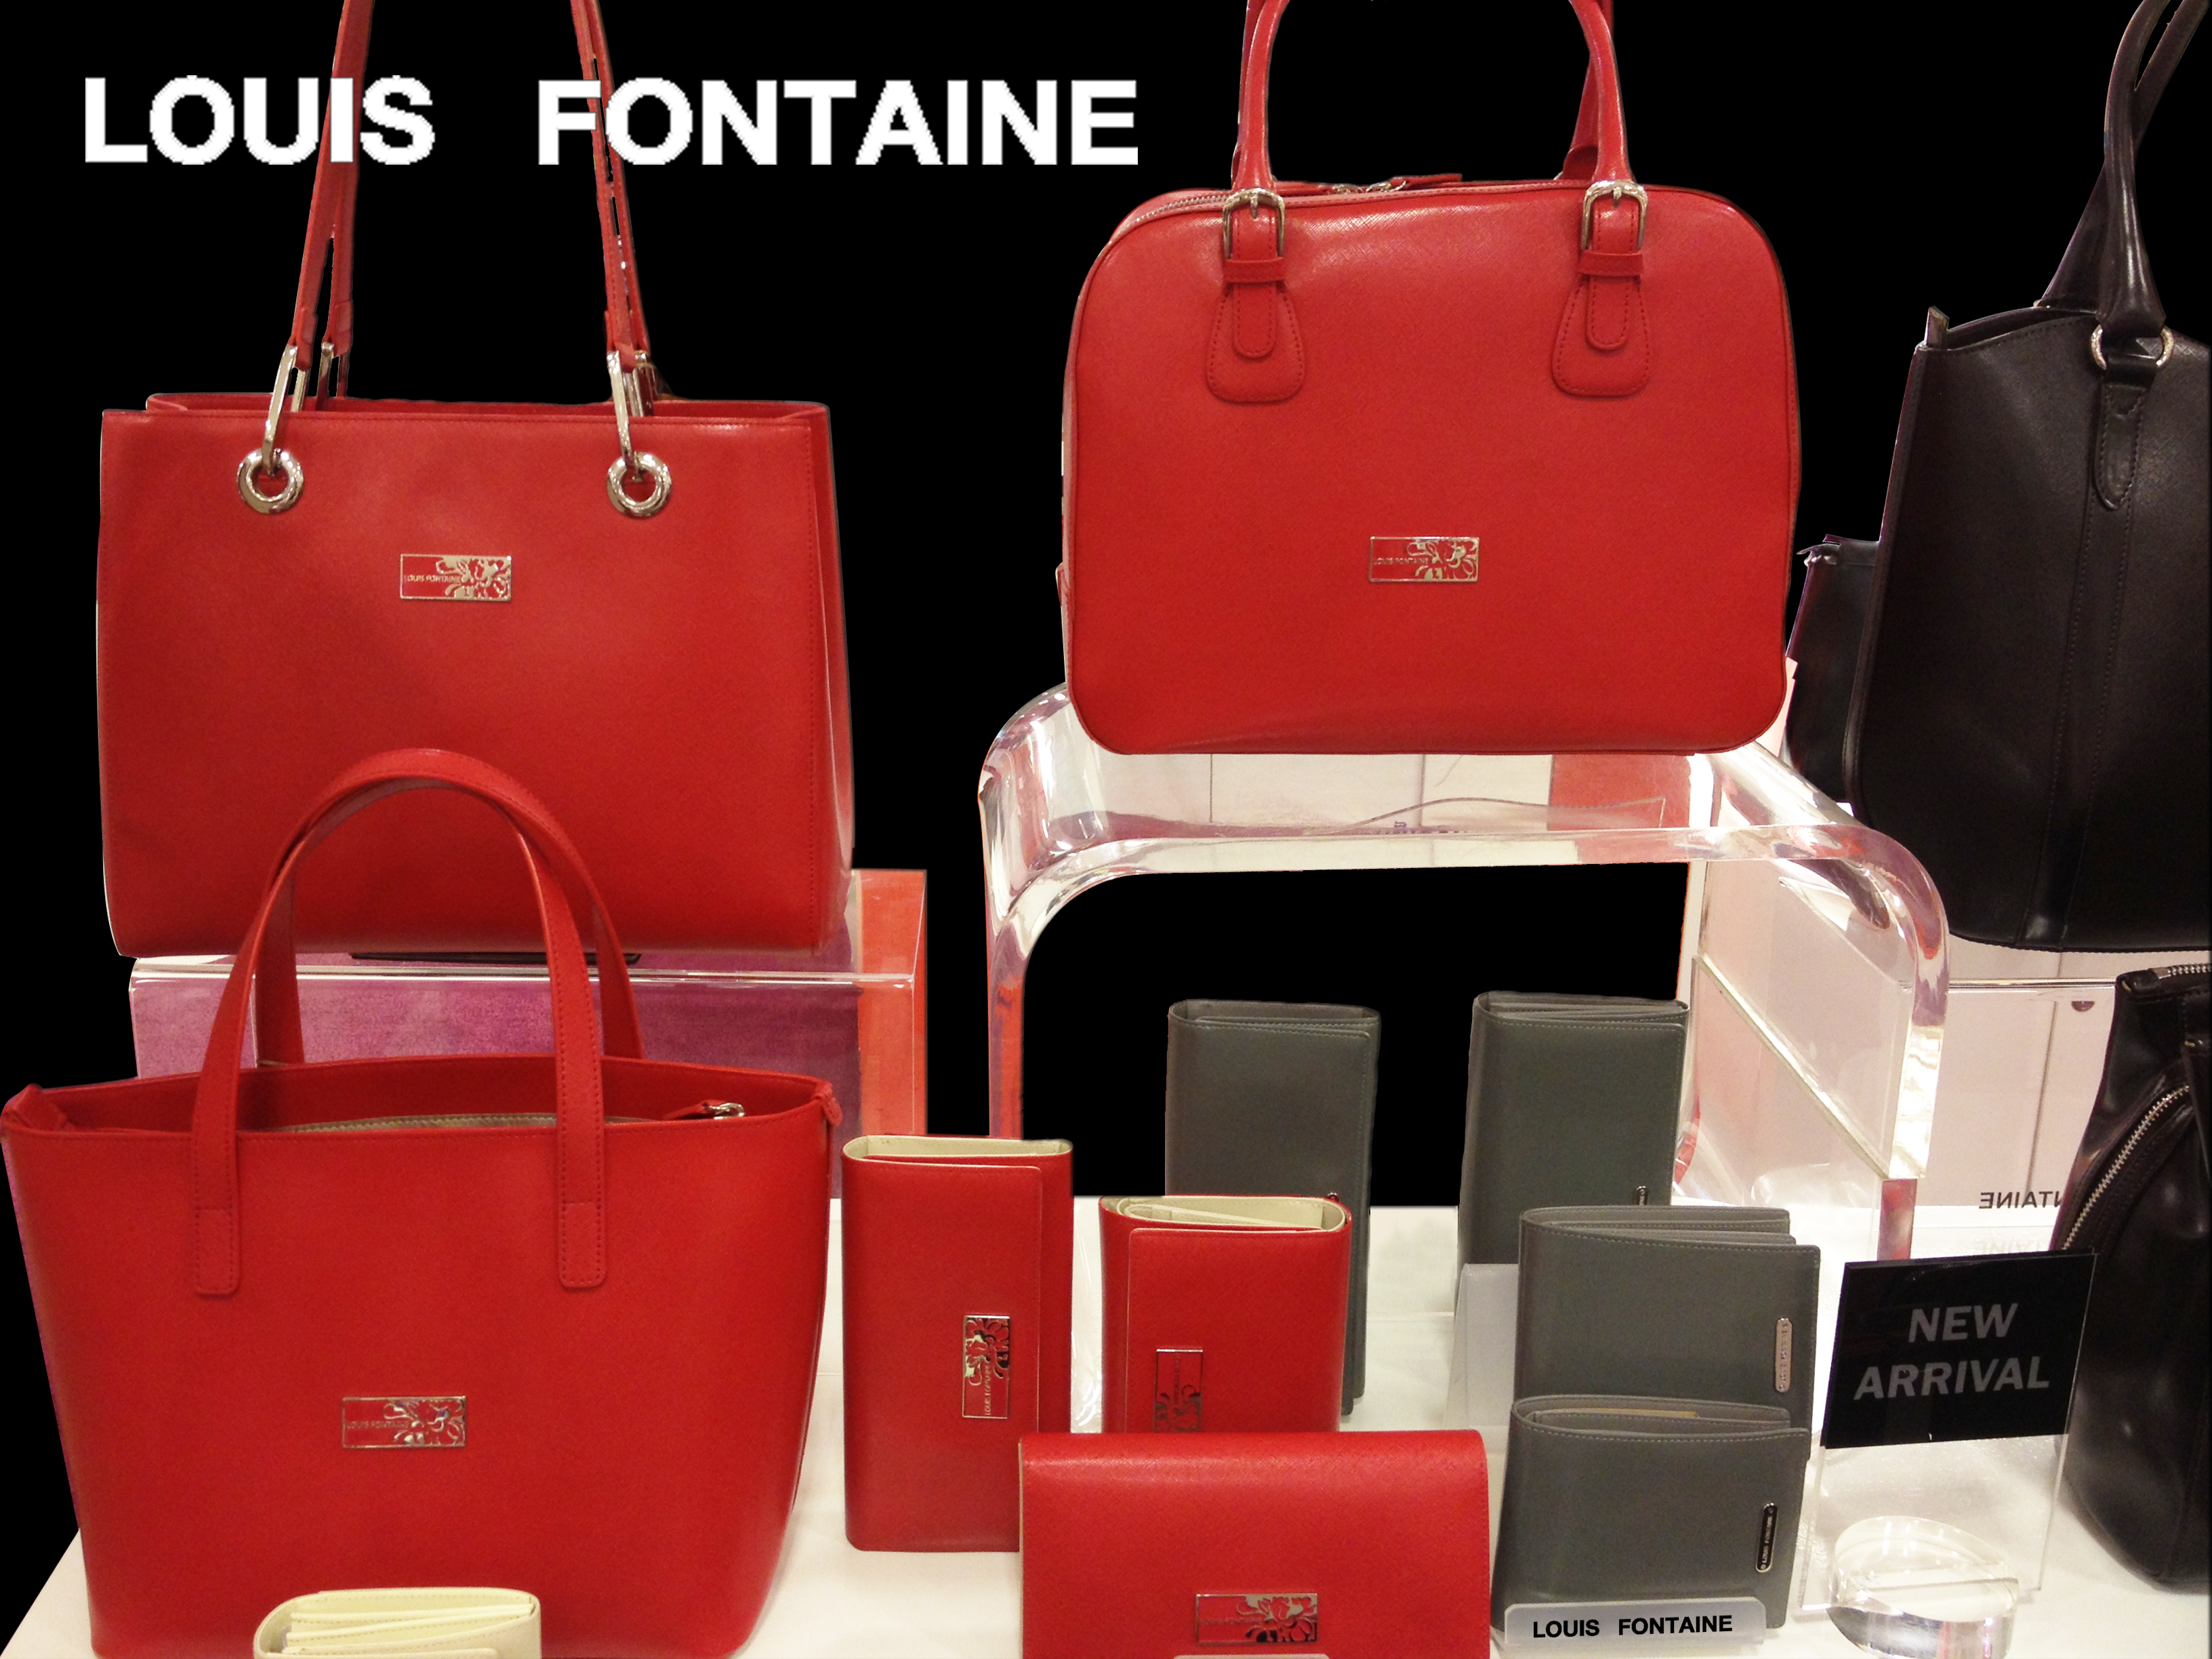 LOUIS FONTAINE: CONNER AT THE MALL BANGKAE – Louis Fontaine